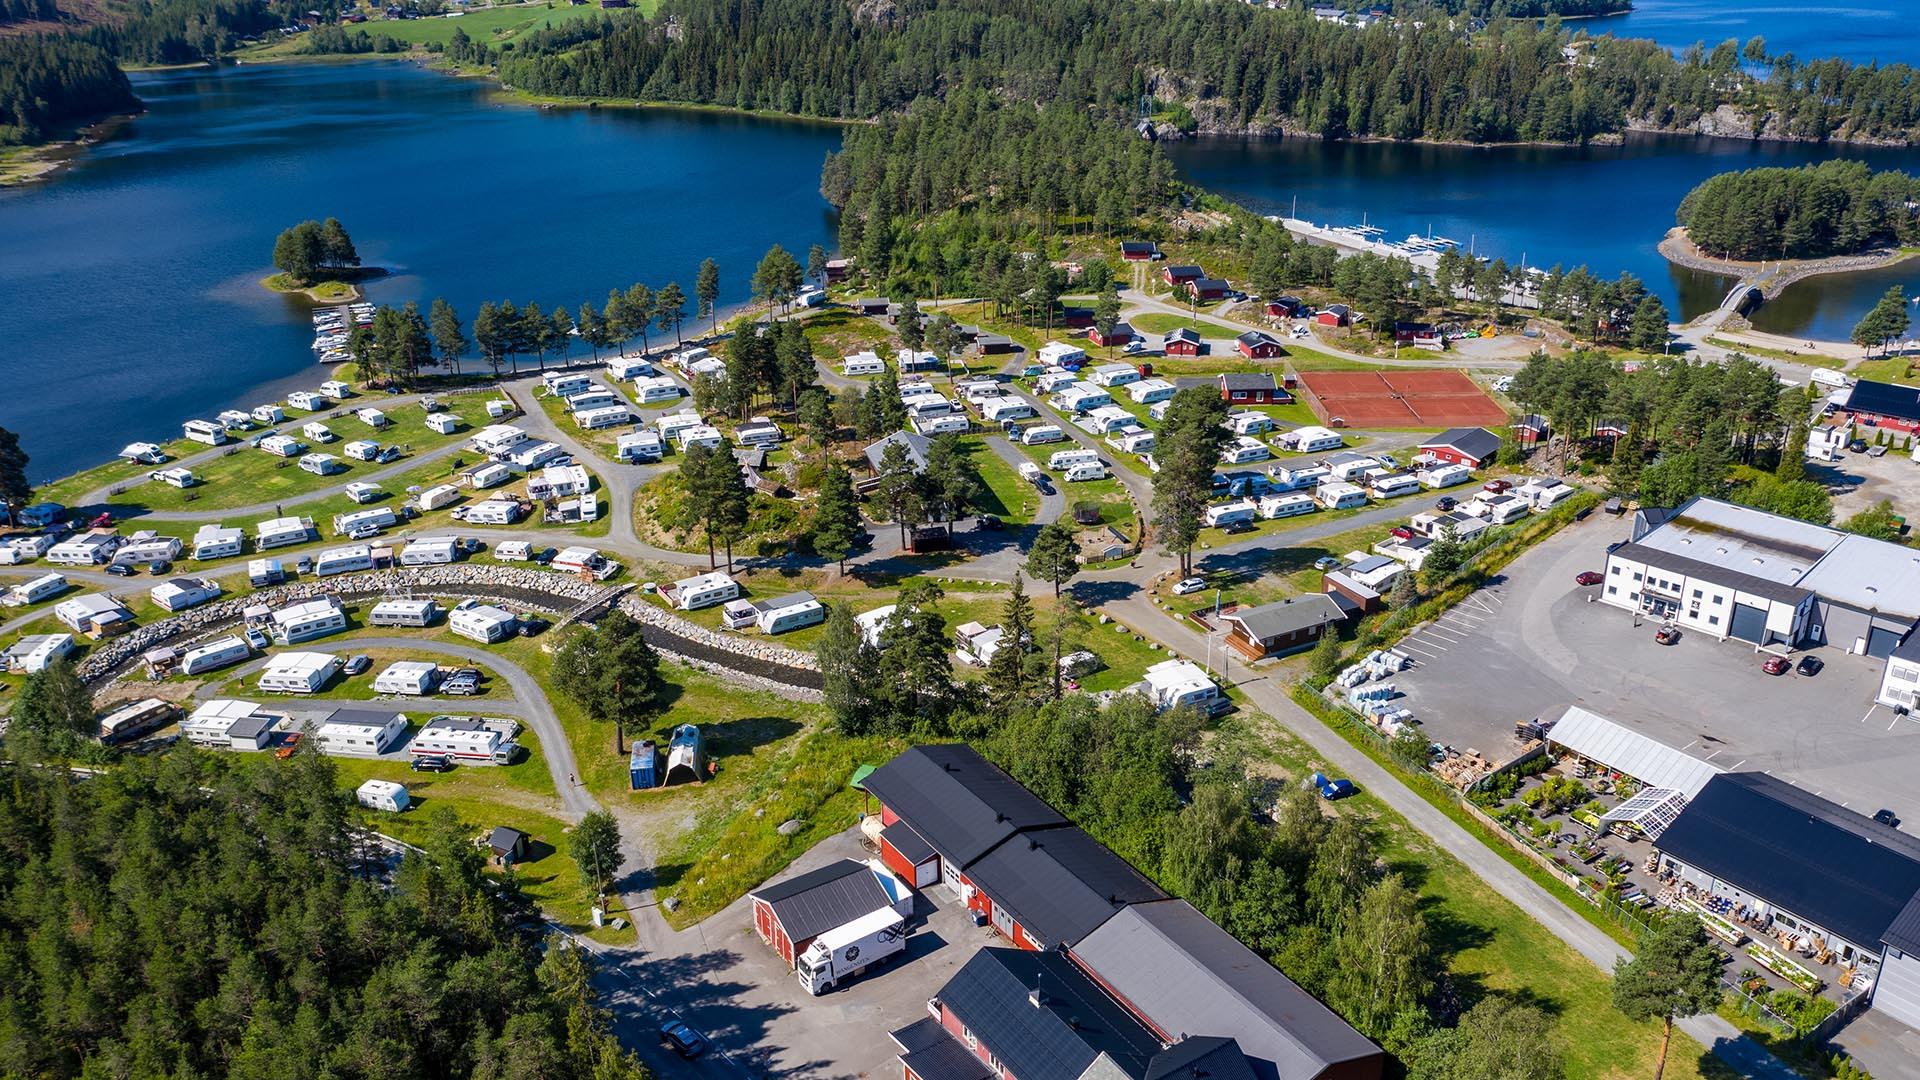 Drone image of camp ground on a lakefront with green areas and an island